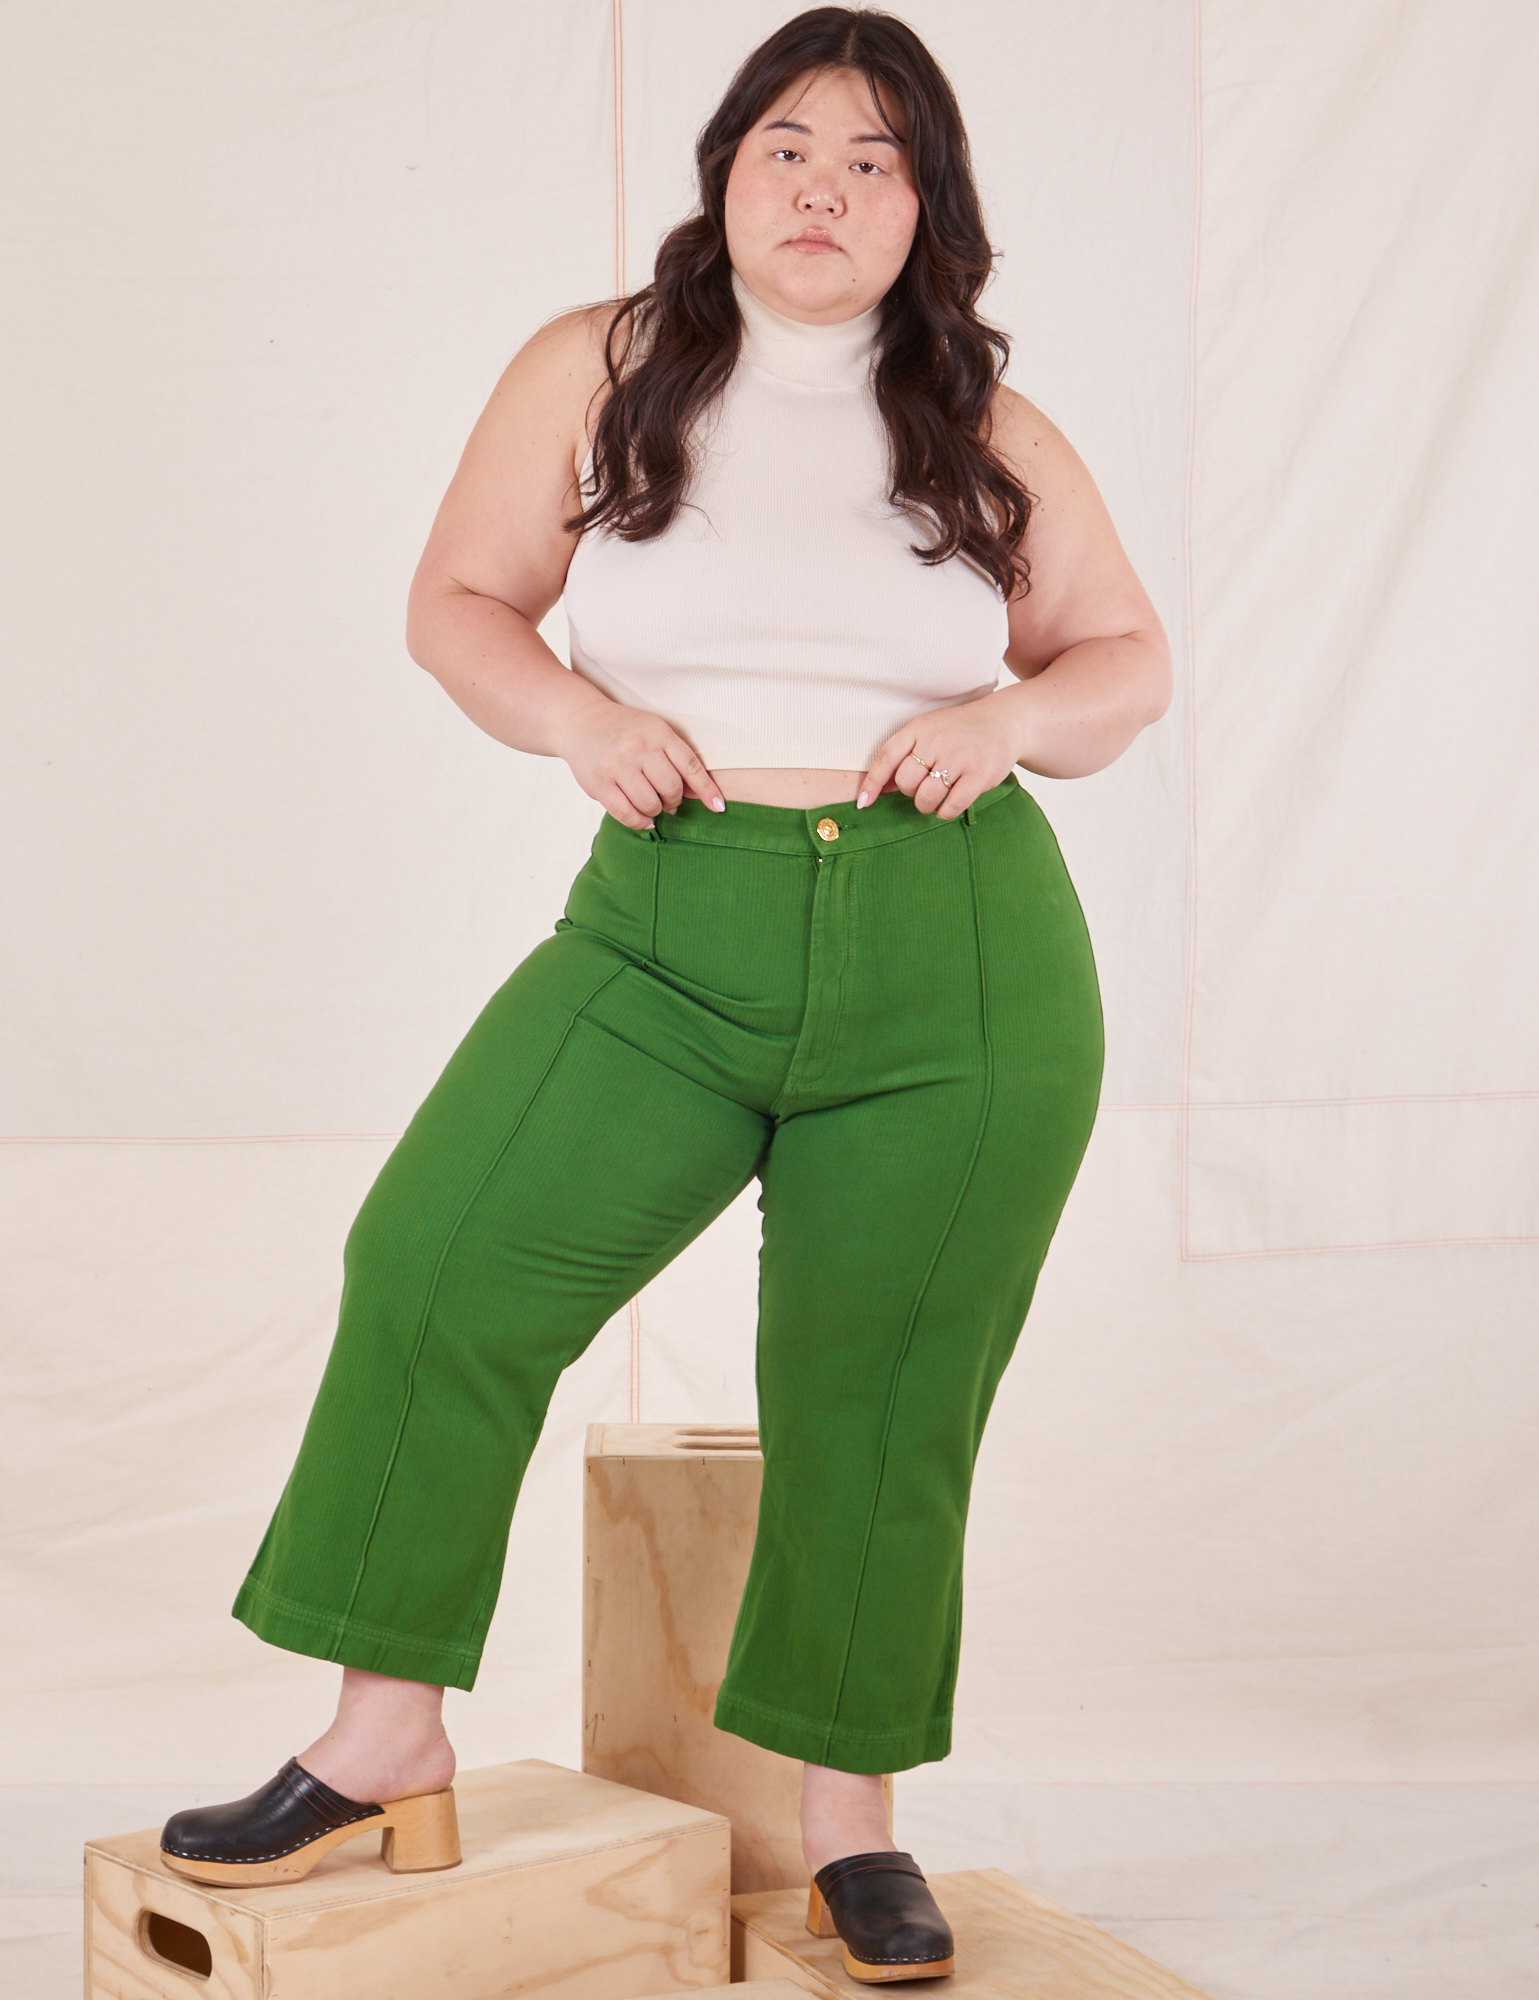 Ashley is 5&#39;7&quot; and wearing 1XL Petite Heritage Westerns in Lawn Green paired with vintage off-white Sleeveless Turtleneck